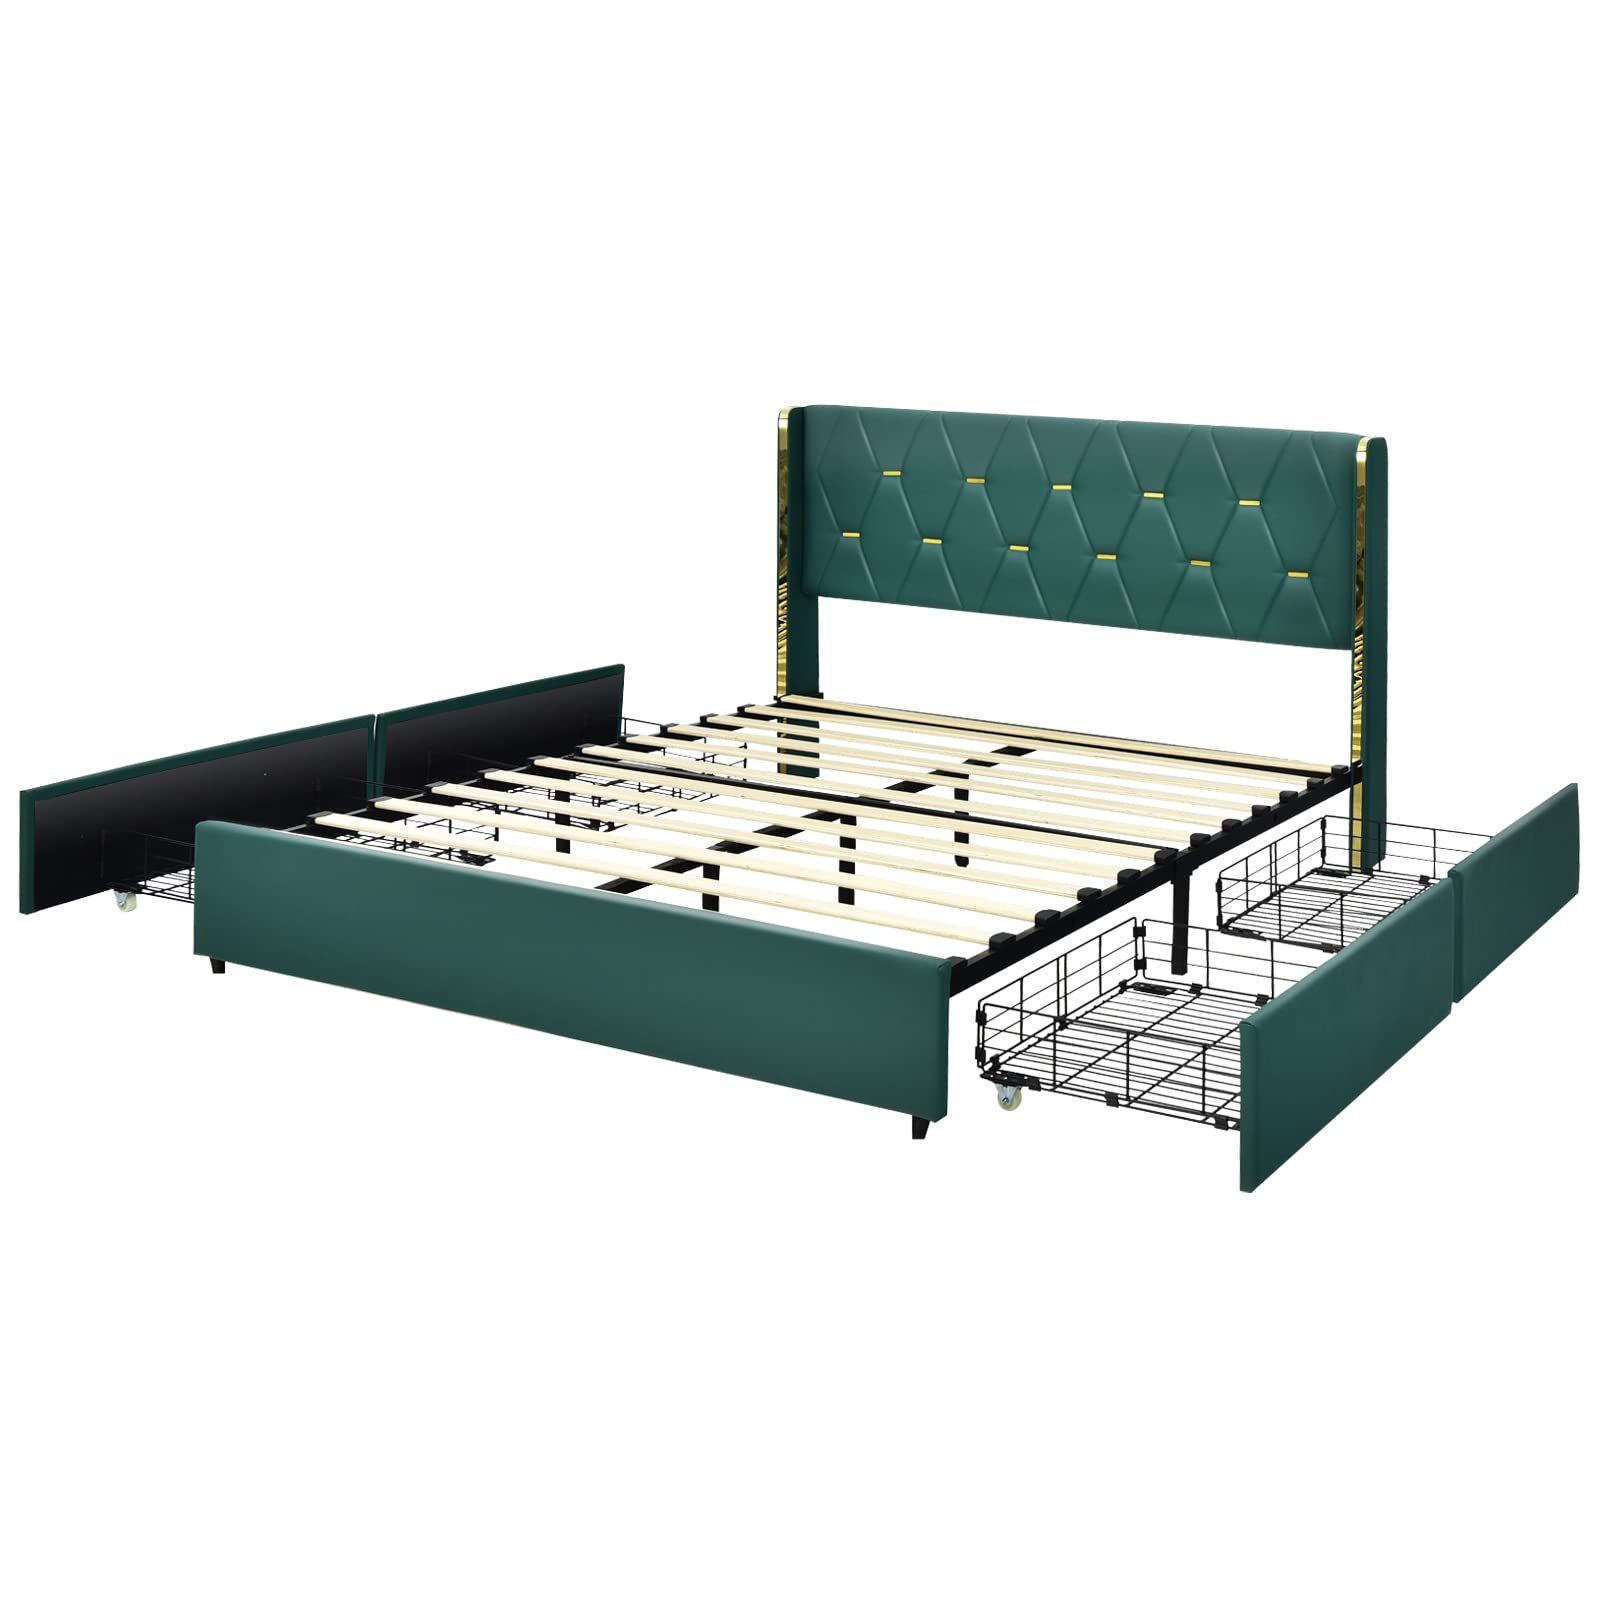 Giantex Upholstered Bed Frame with 4 Drawers